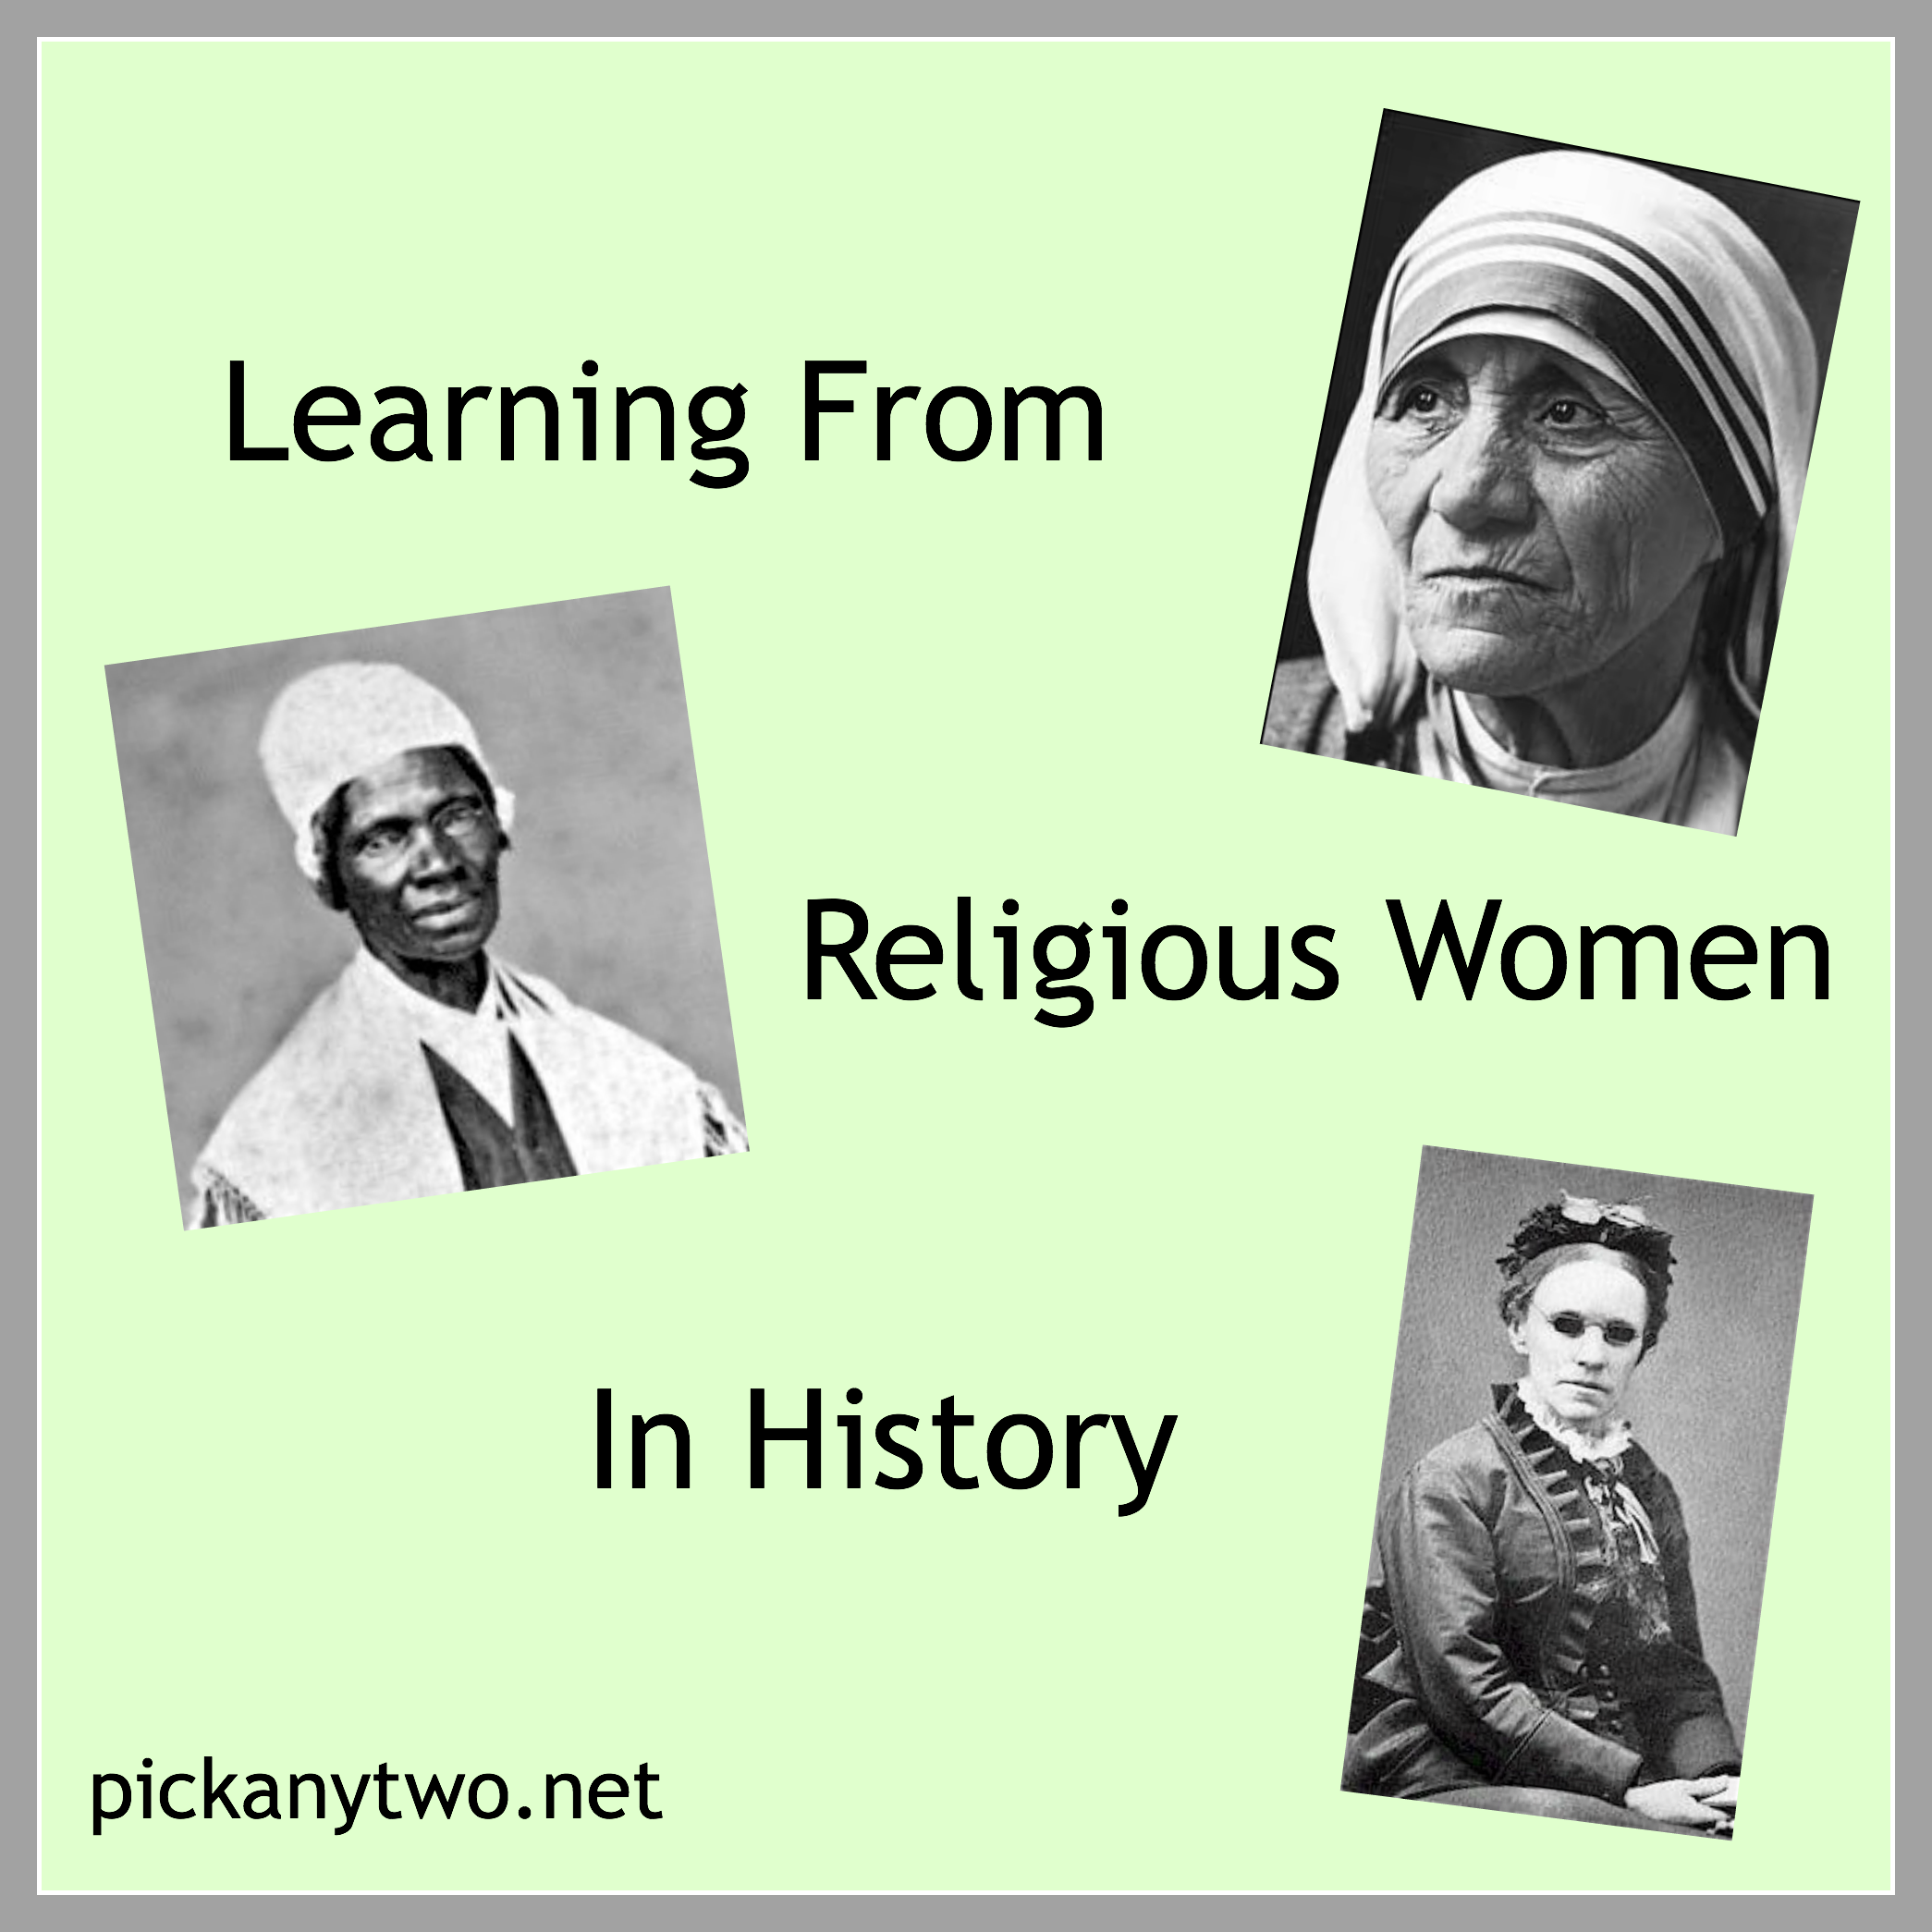 Learning from Religious Women in History